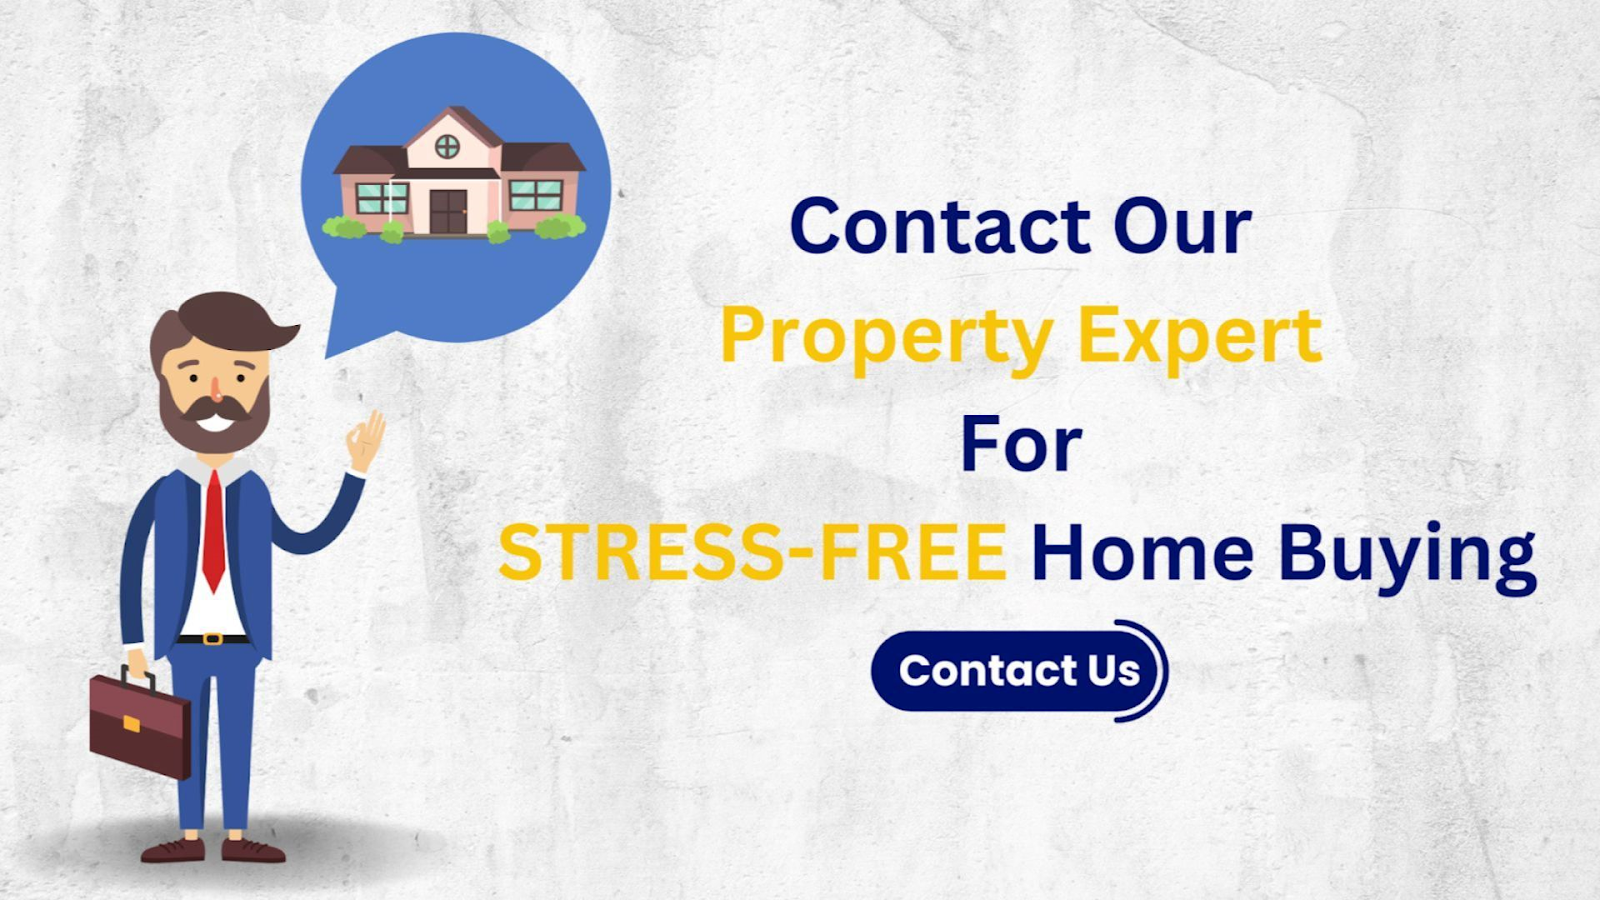 Speak with a PropertyCloud real estate expert for detailed guidance on the scheme.